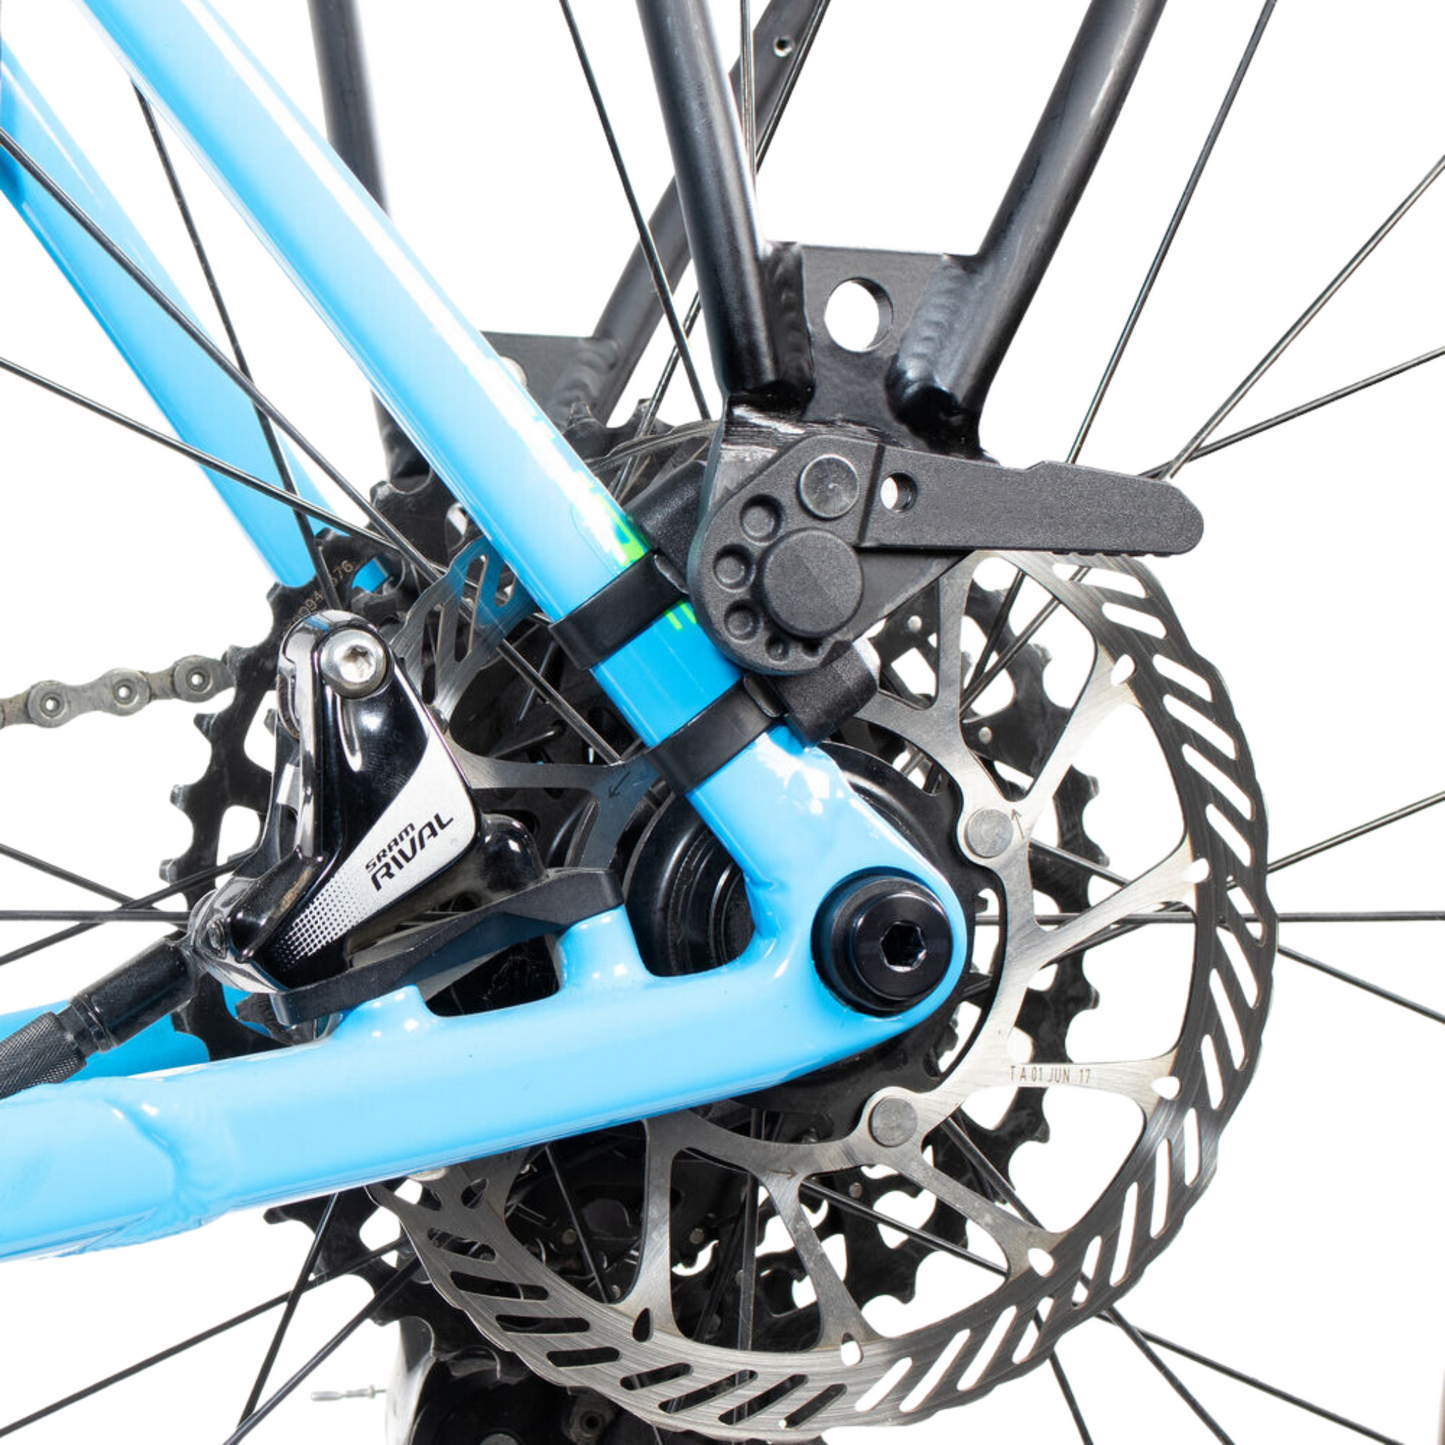 Quick-Rack Seat Stay Adapter